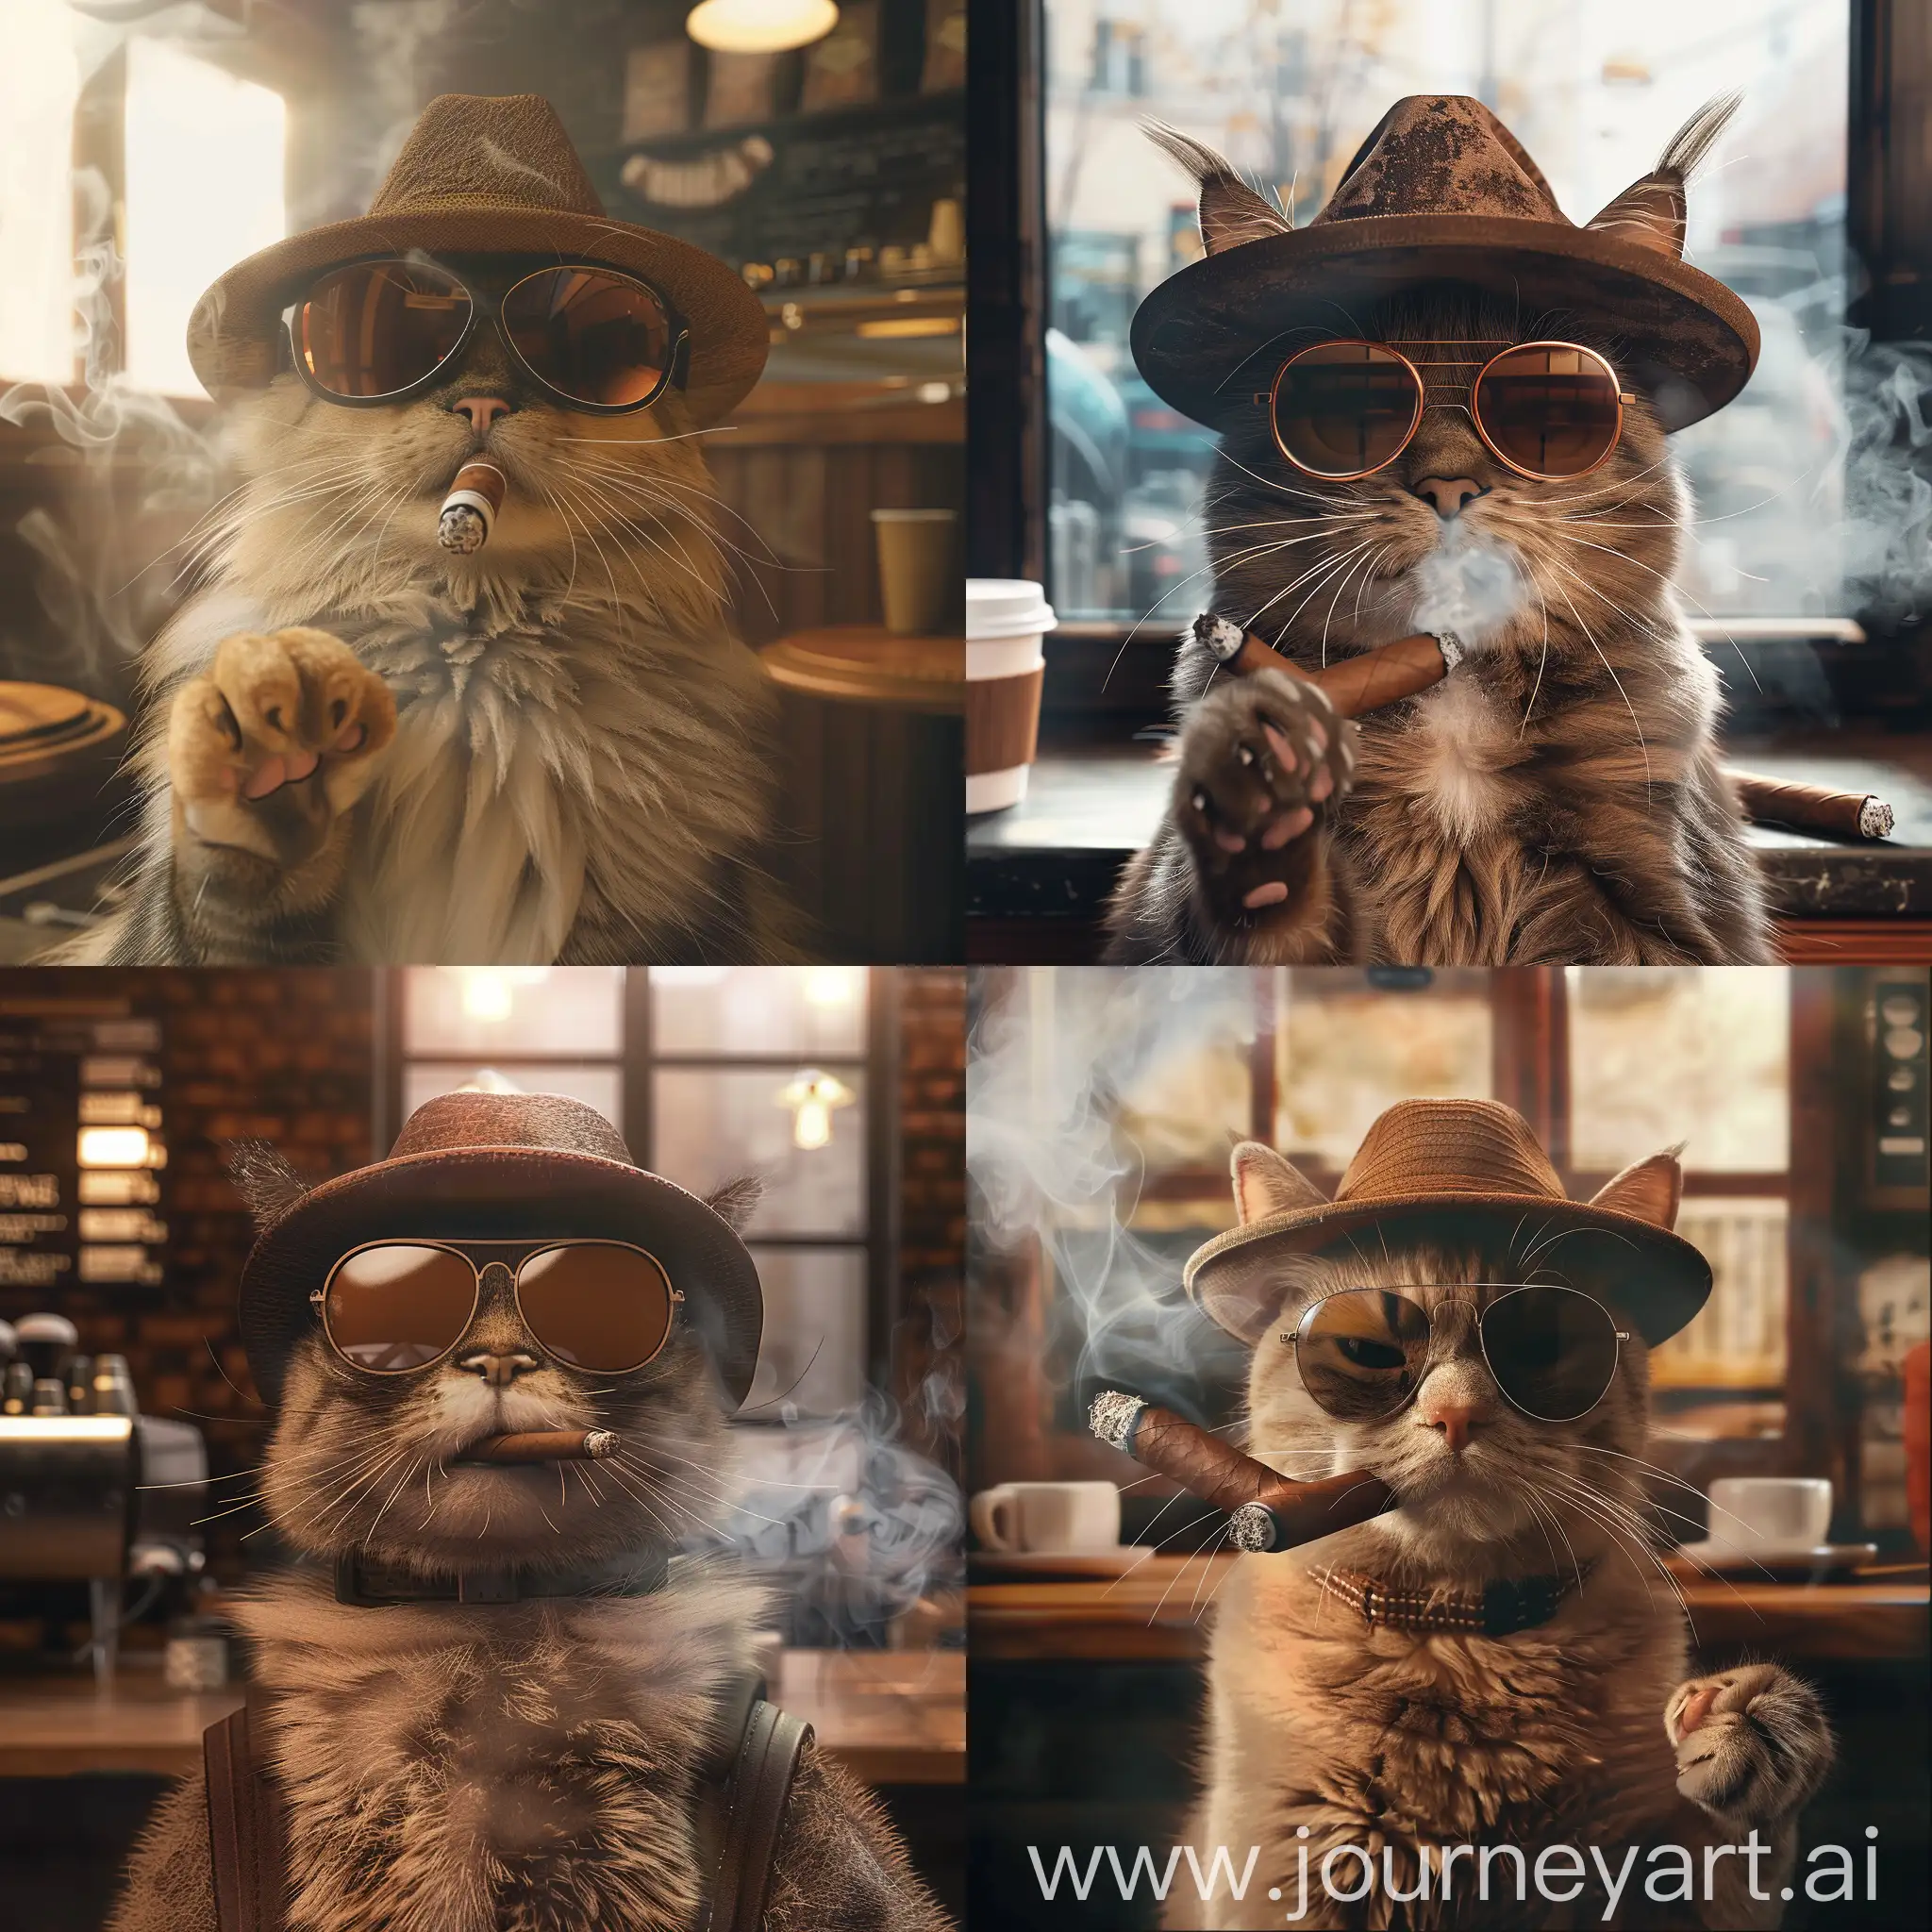 Cat-with-Sunglasses-and-Brown-Hat-Smoking-Cigar-in-Coffee-Shop